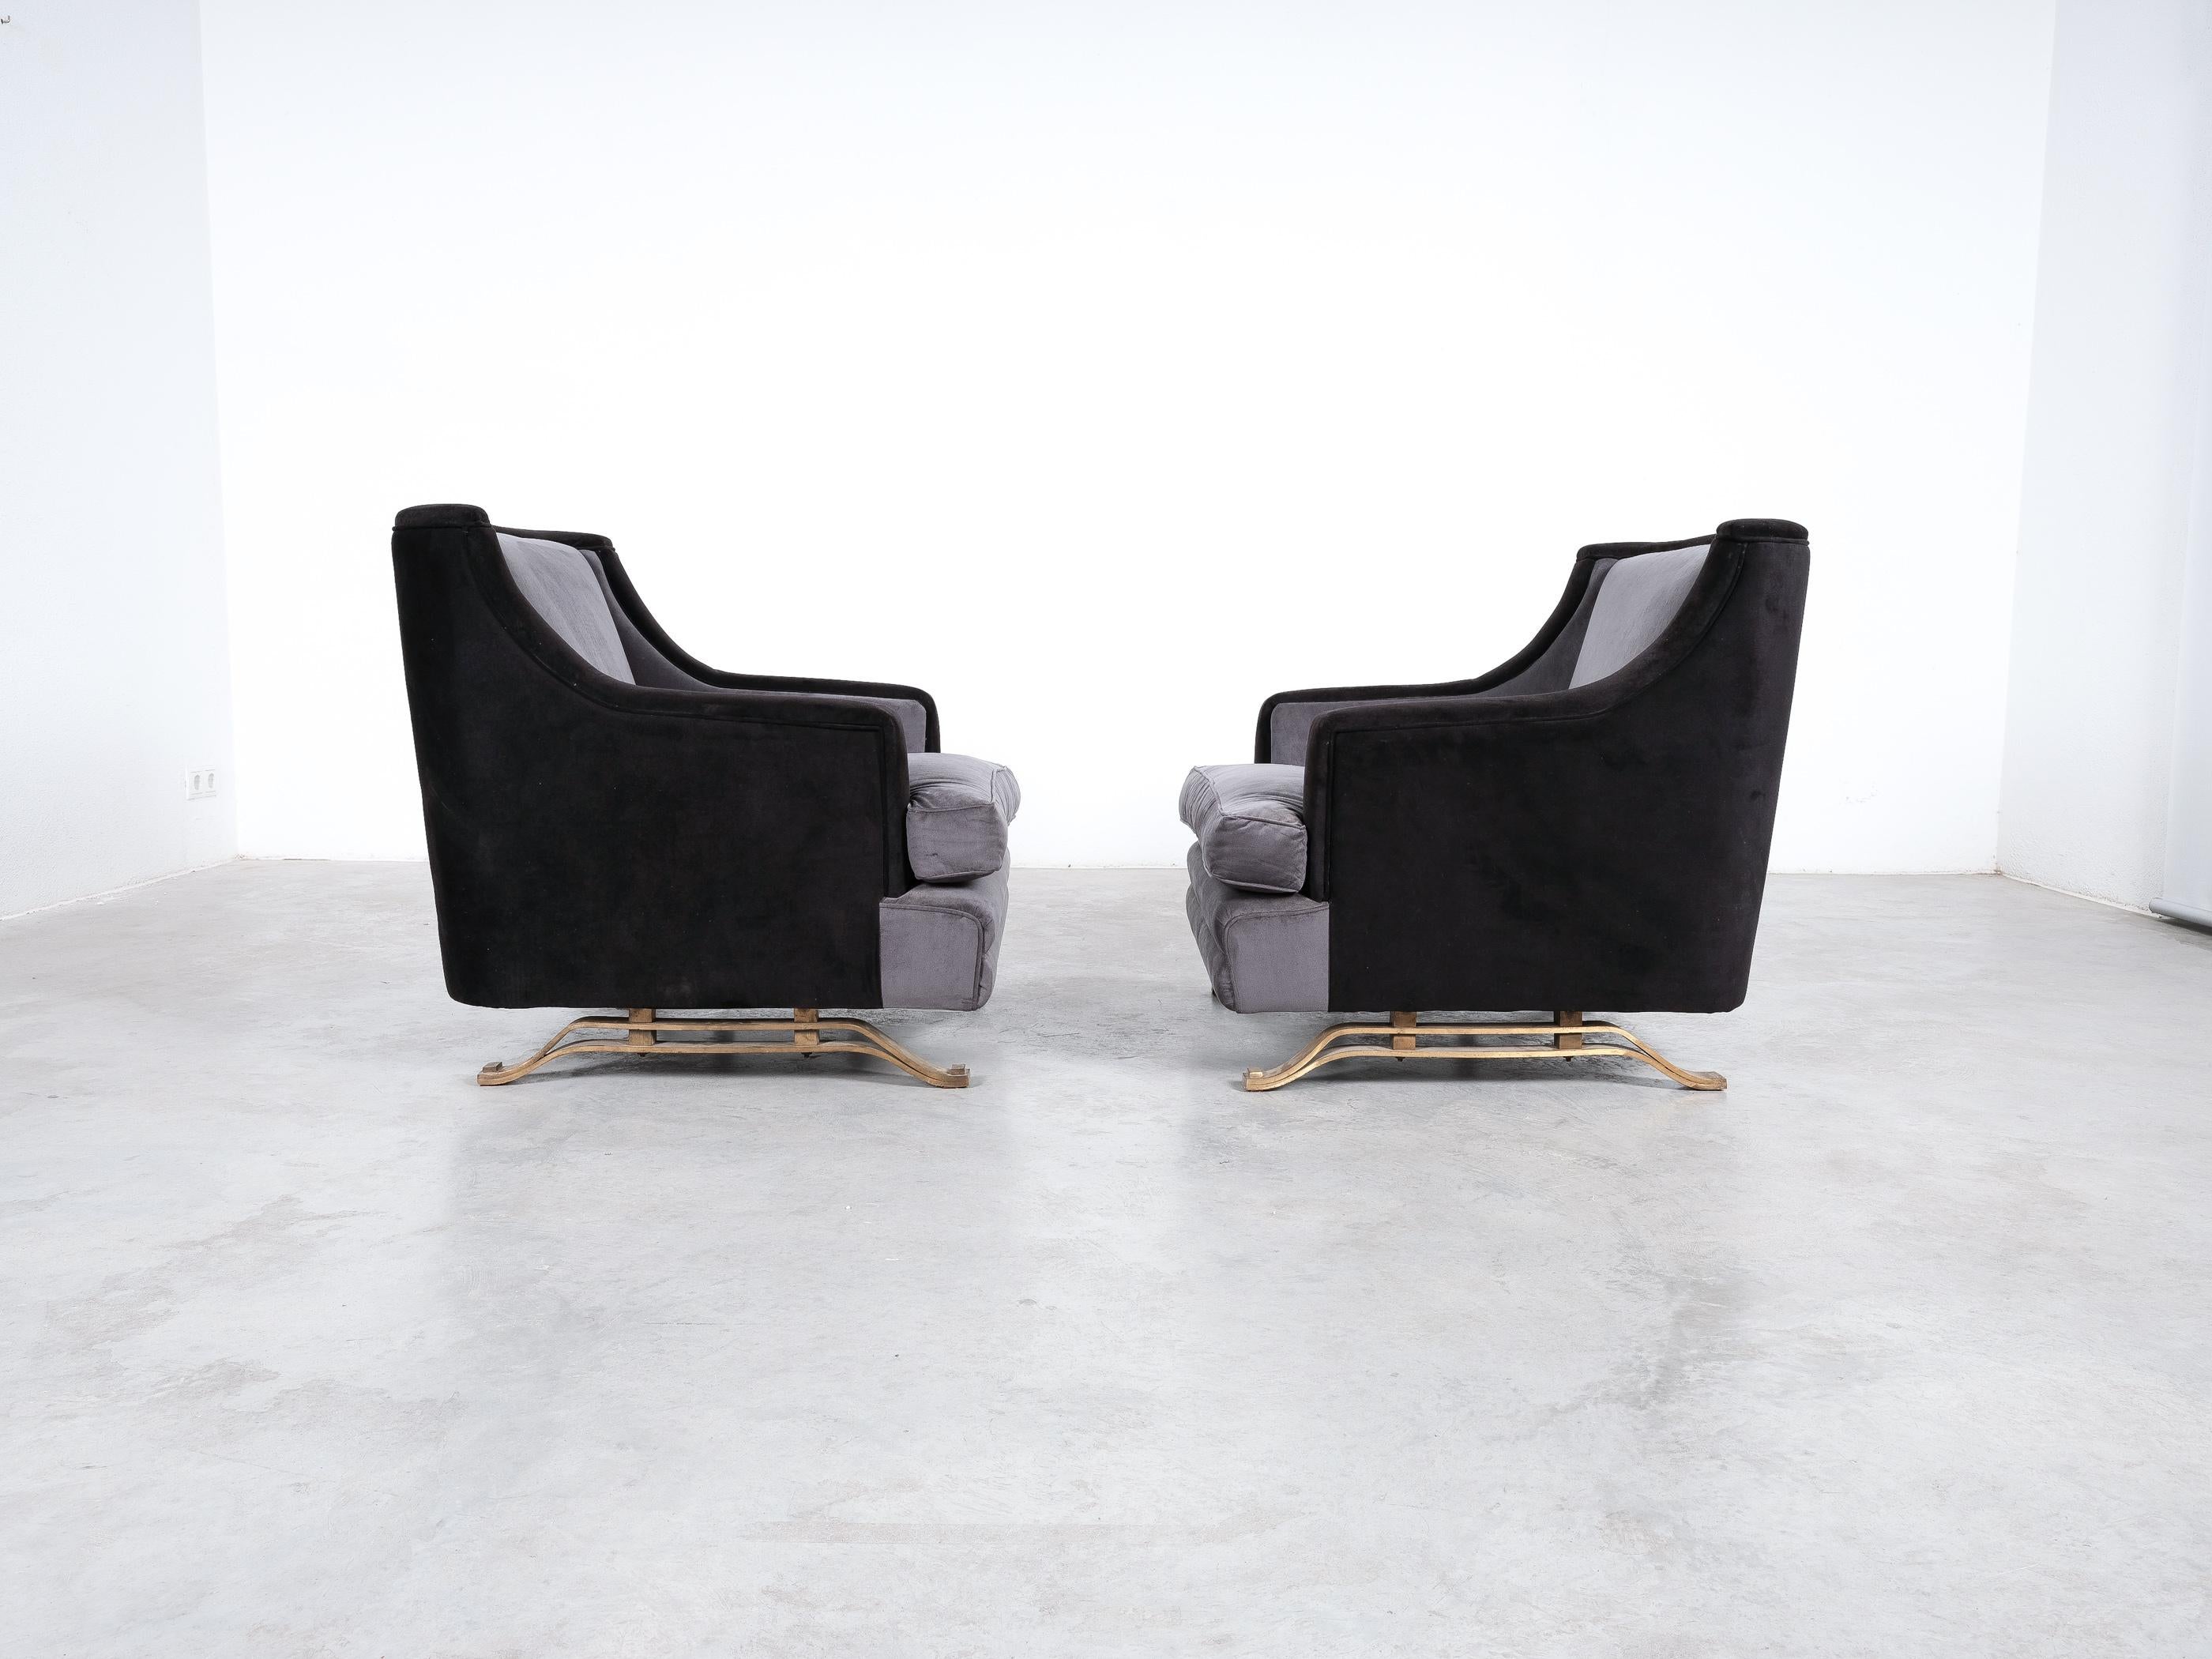 Nice pair of Italian armchairs, newly upholstered in velvet, circa 1955

Stylish club chairs, very comfortable and upholstered in dark grey and black velvet. They are in good original condition with no major flaws and ready to use. Main focus of